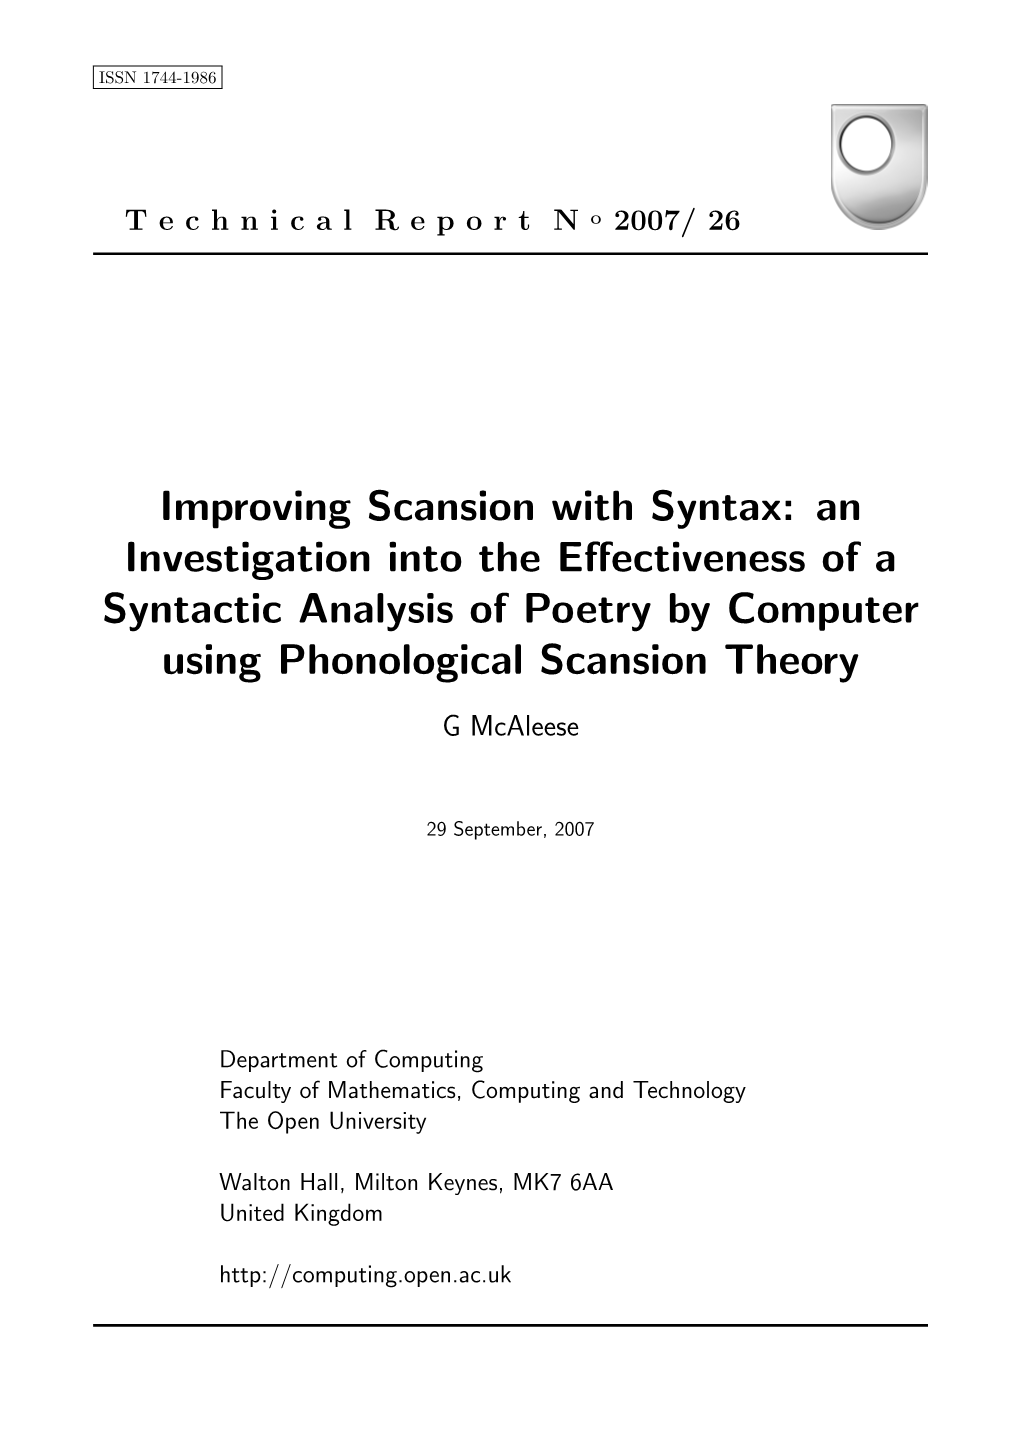 Improving Scansion with Syntax: an Investigation Into the Eﬀectiveness of a Syntactic Analysis of Poetry by Computer Using Phonological Scansion Theory